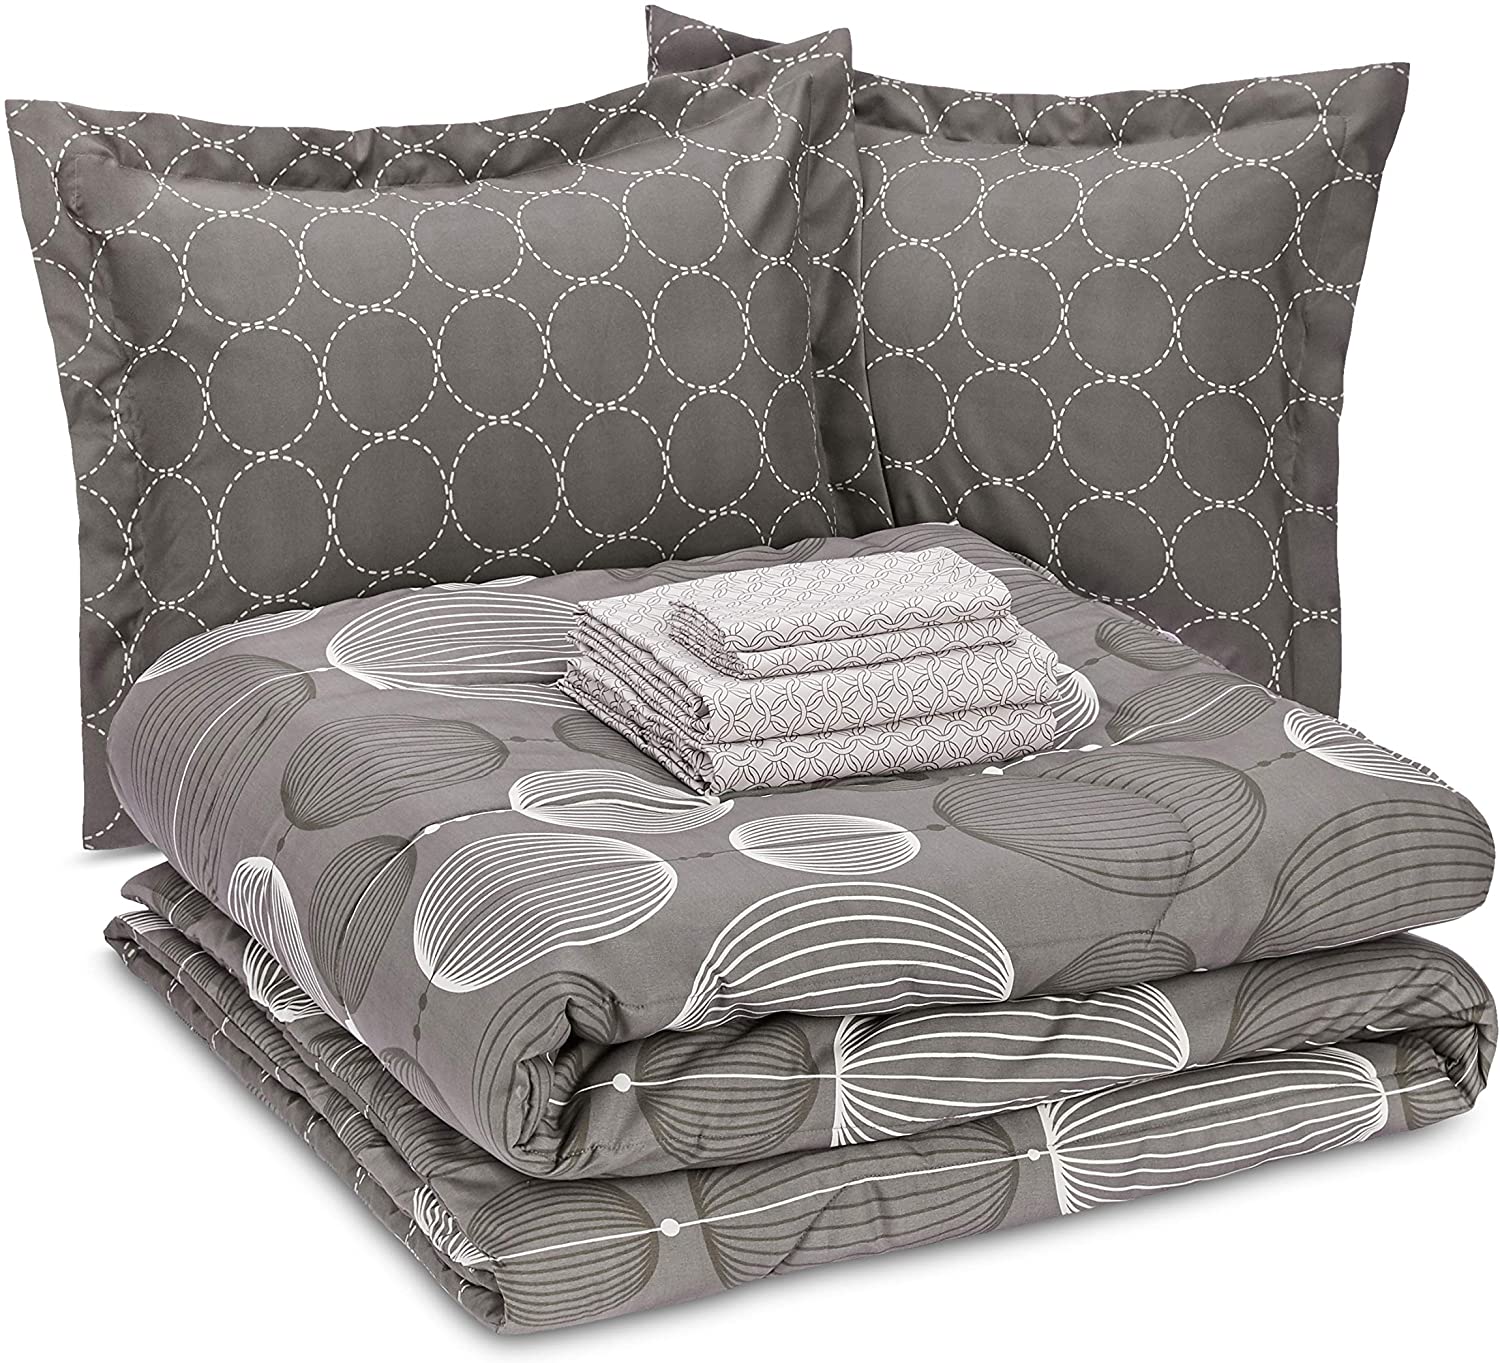 Amazon Basics Bed-In-A-Bag Queen-Size Bedding, 7-Piece